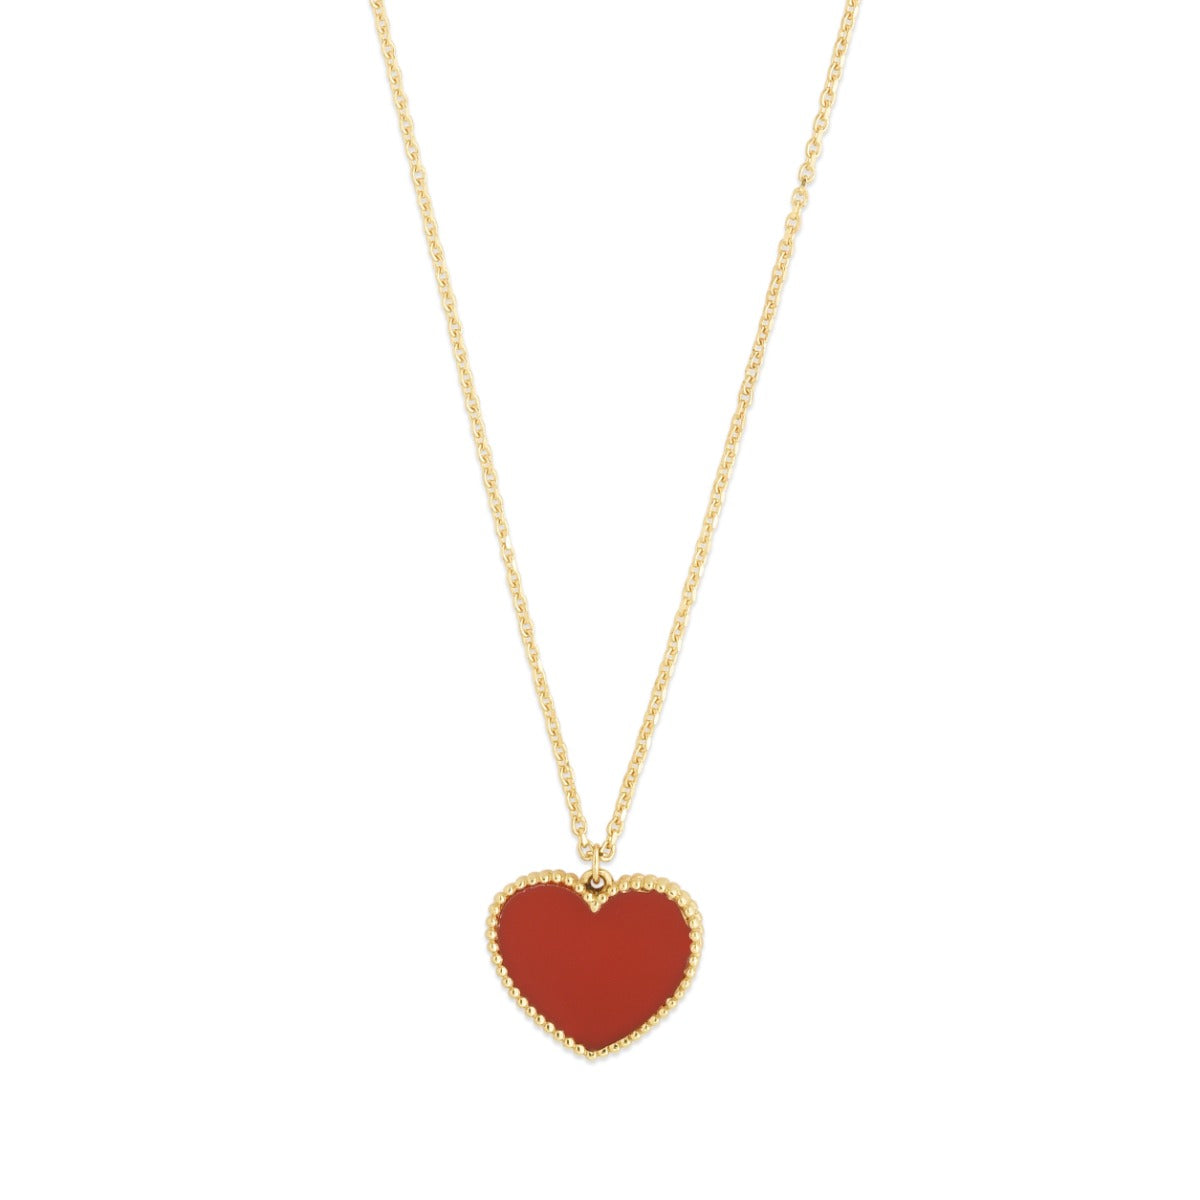 14K Gold Polished Heart Necklace with Lobster Clasp with Paste of Cornelian